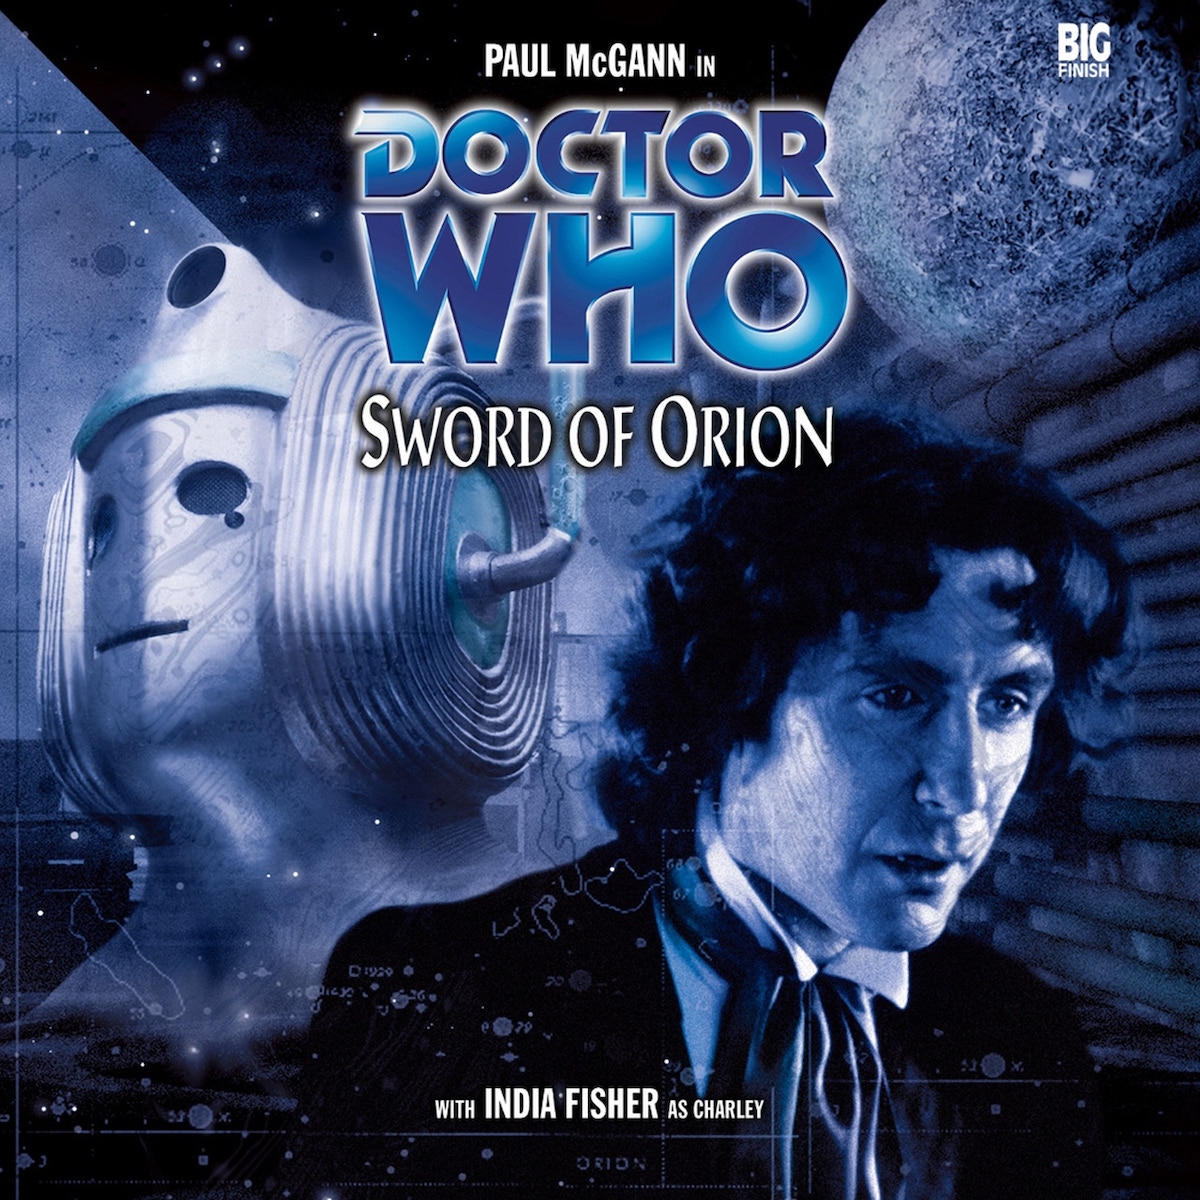 Sword of Orion